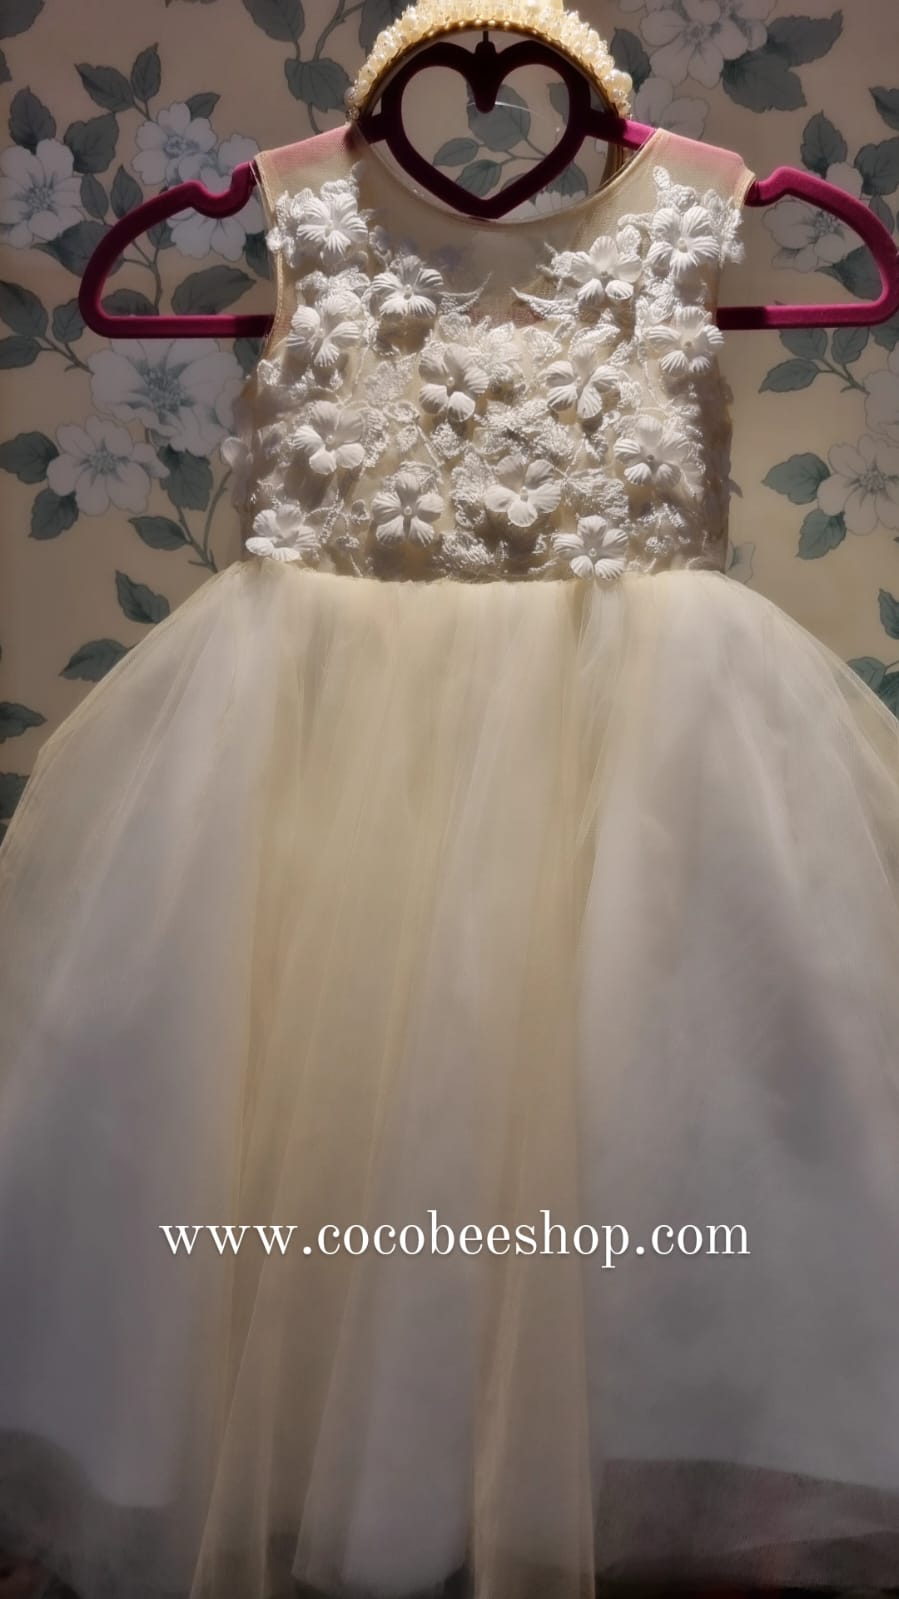 cocobee-Champagne Blossom Lace Tulle Alice Gown 1